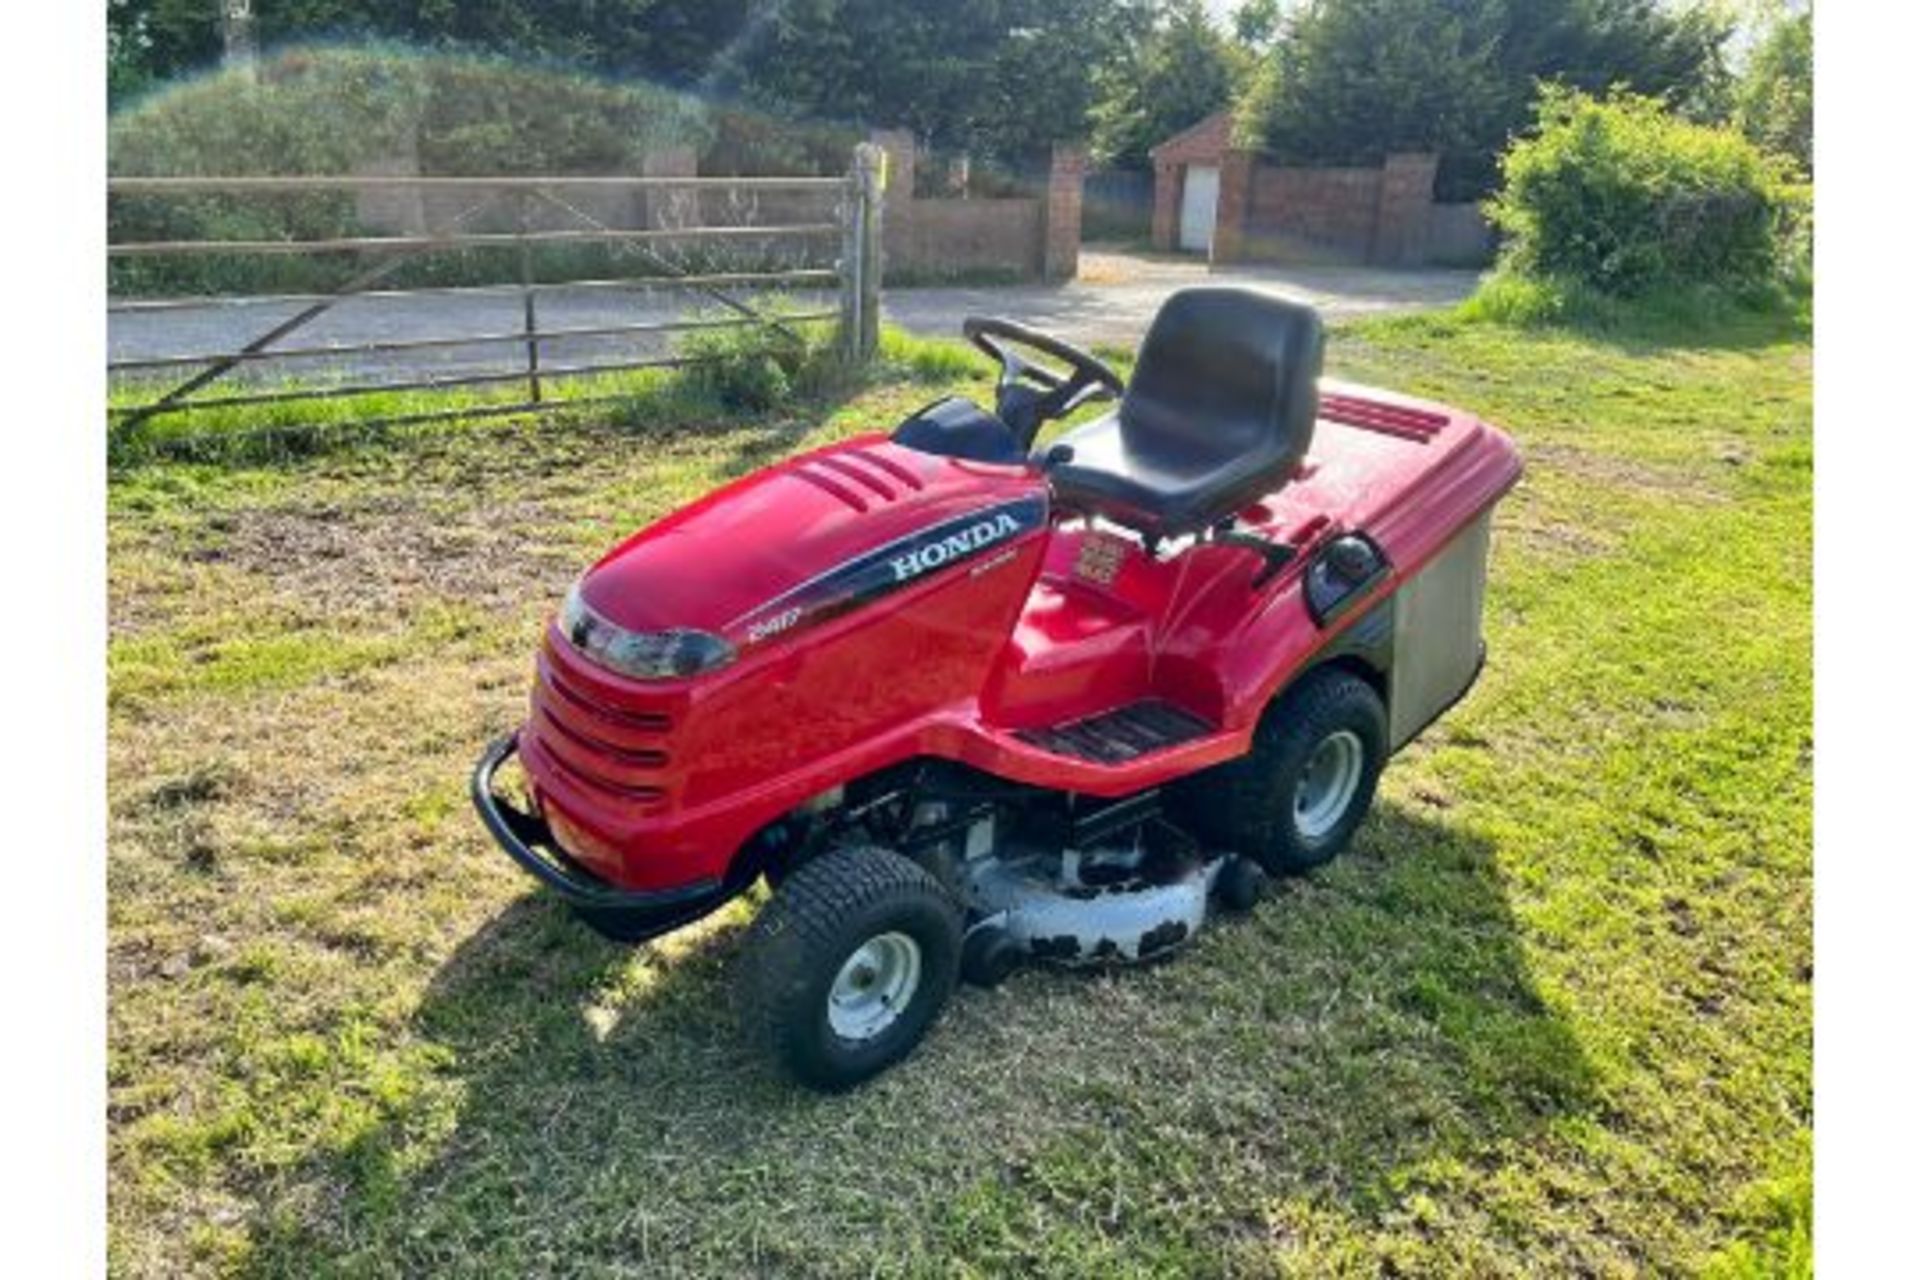 Honda 2417 Ride On Mower With Rear Collector, Runs Drives Cuts And Collects "PLUS VAT" - Image 3 of 22